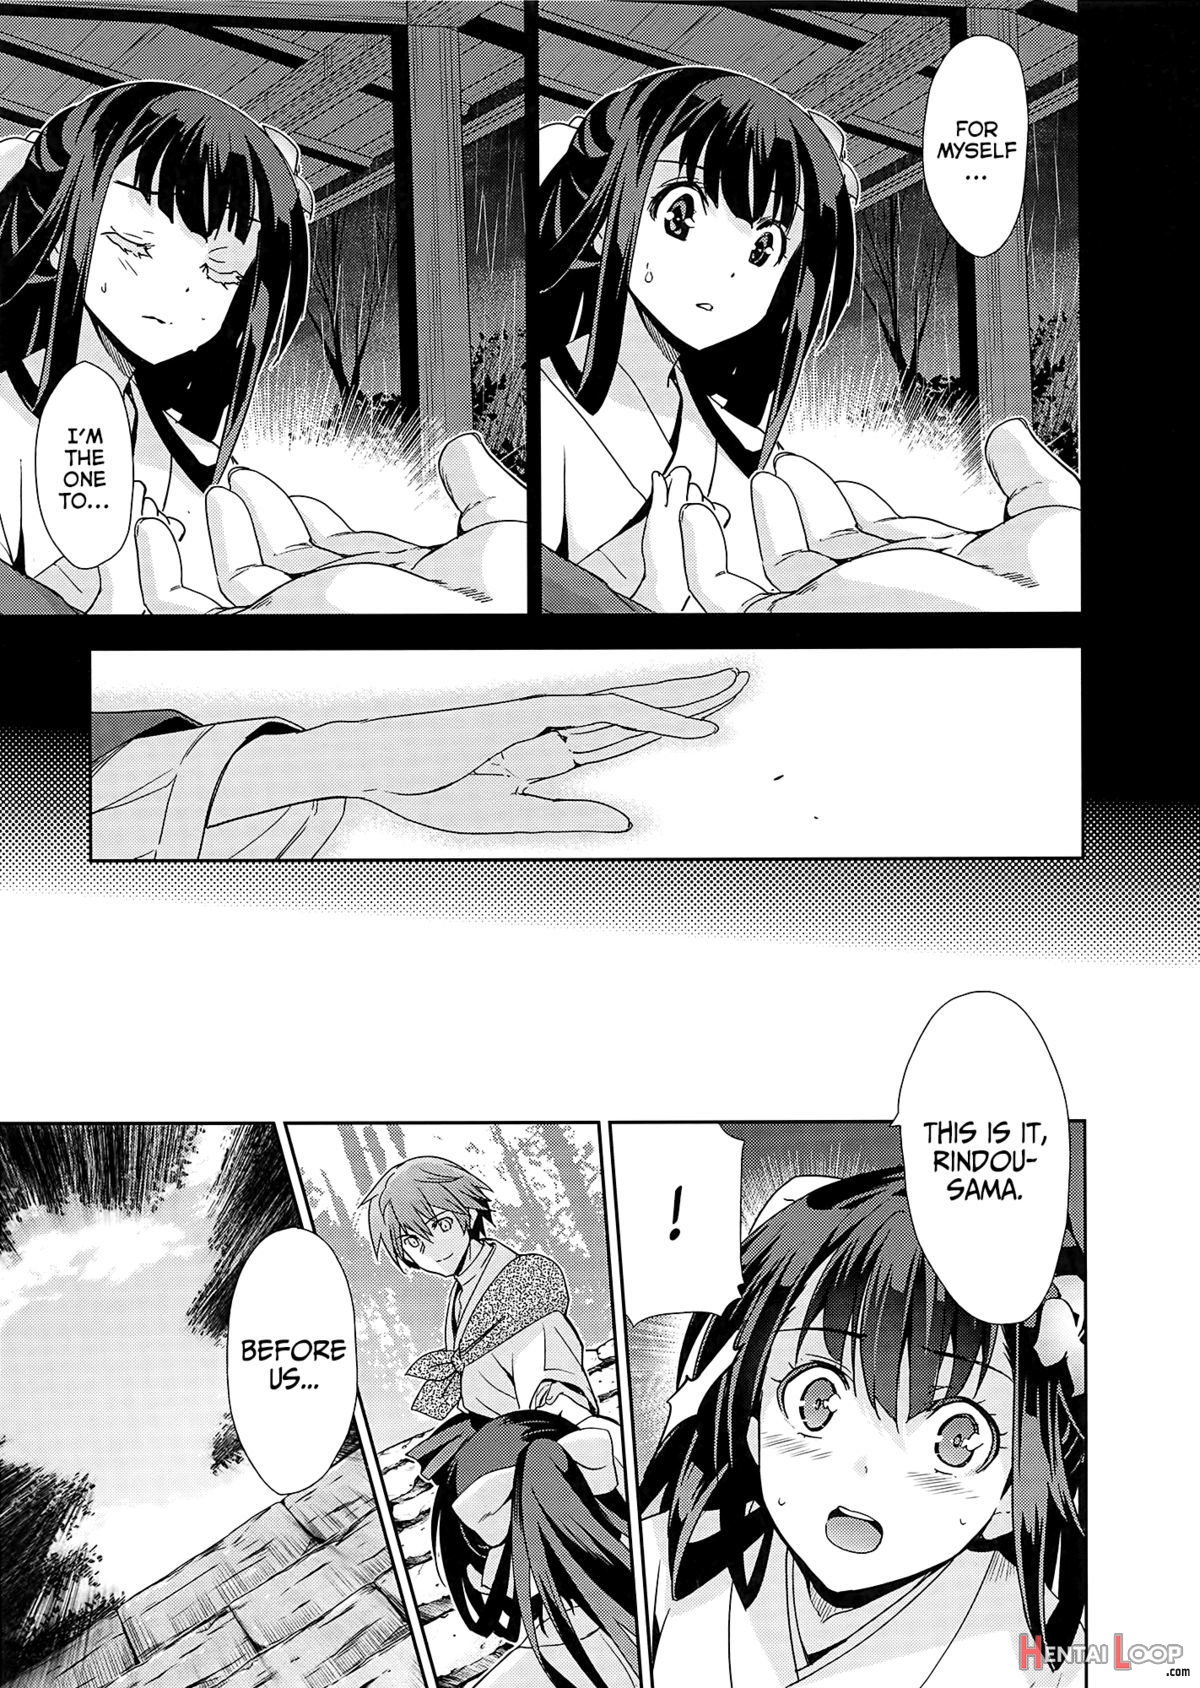 Rindou page 68